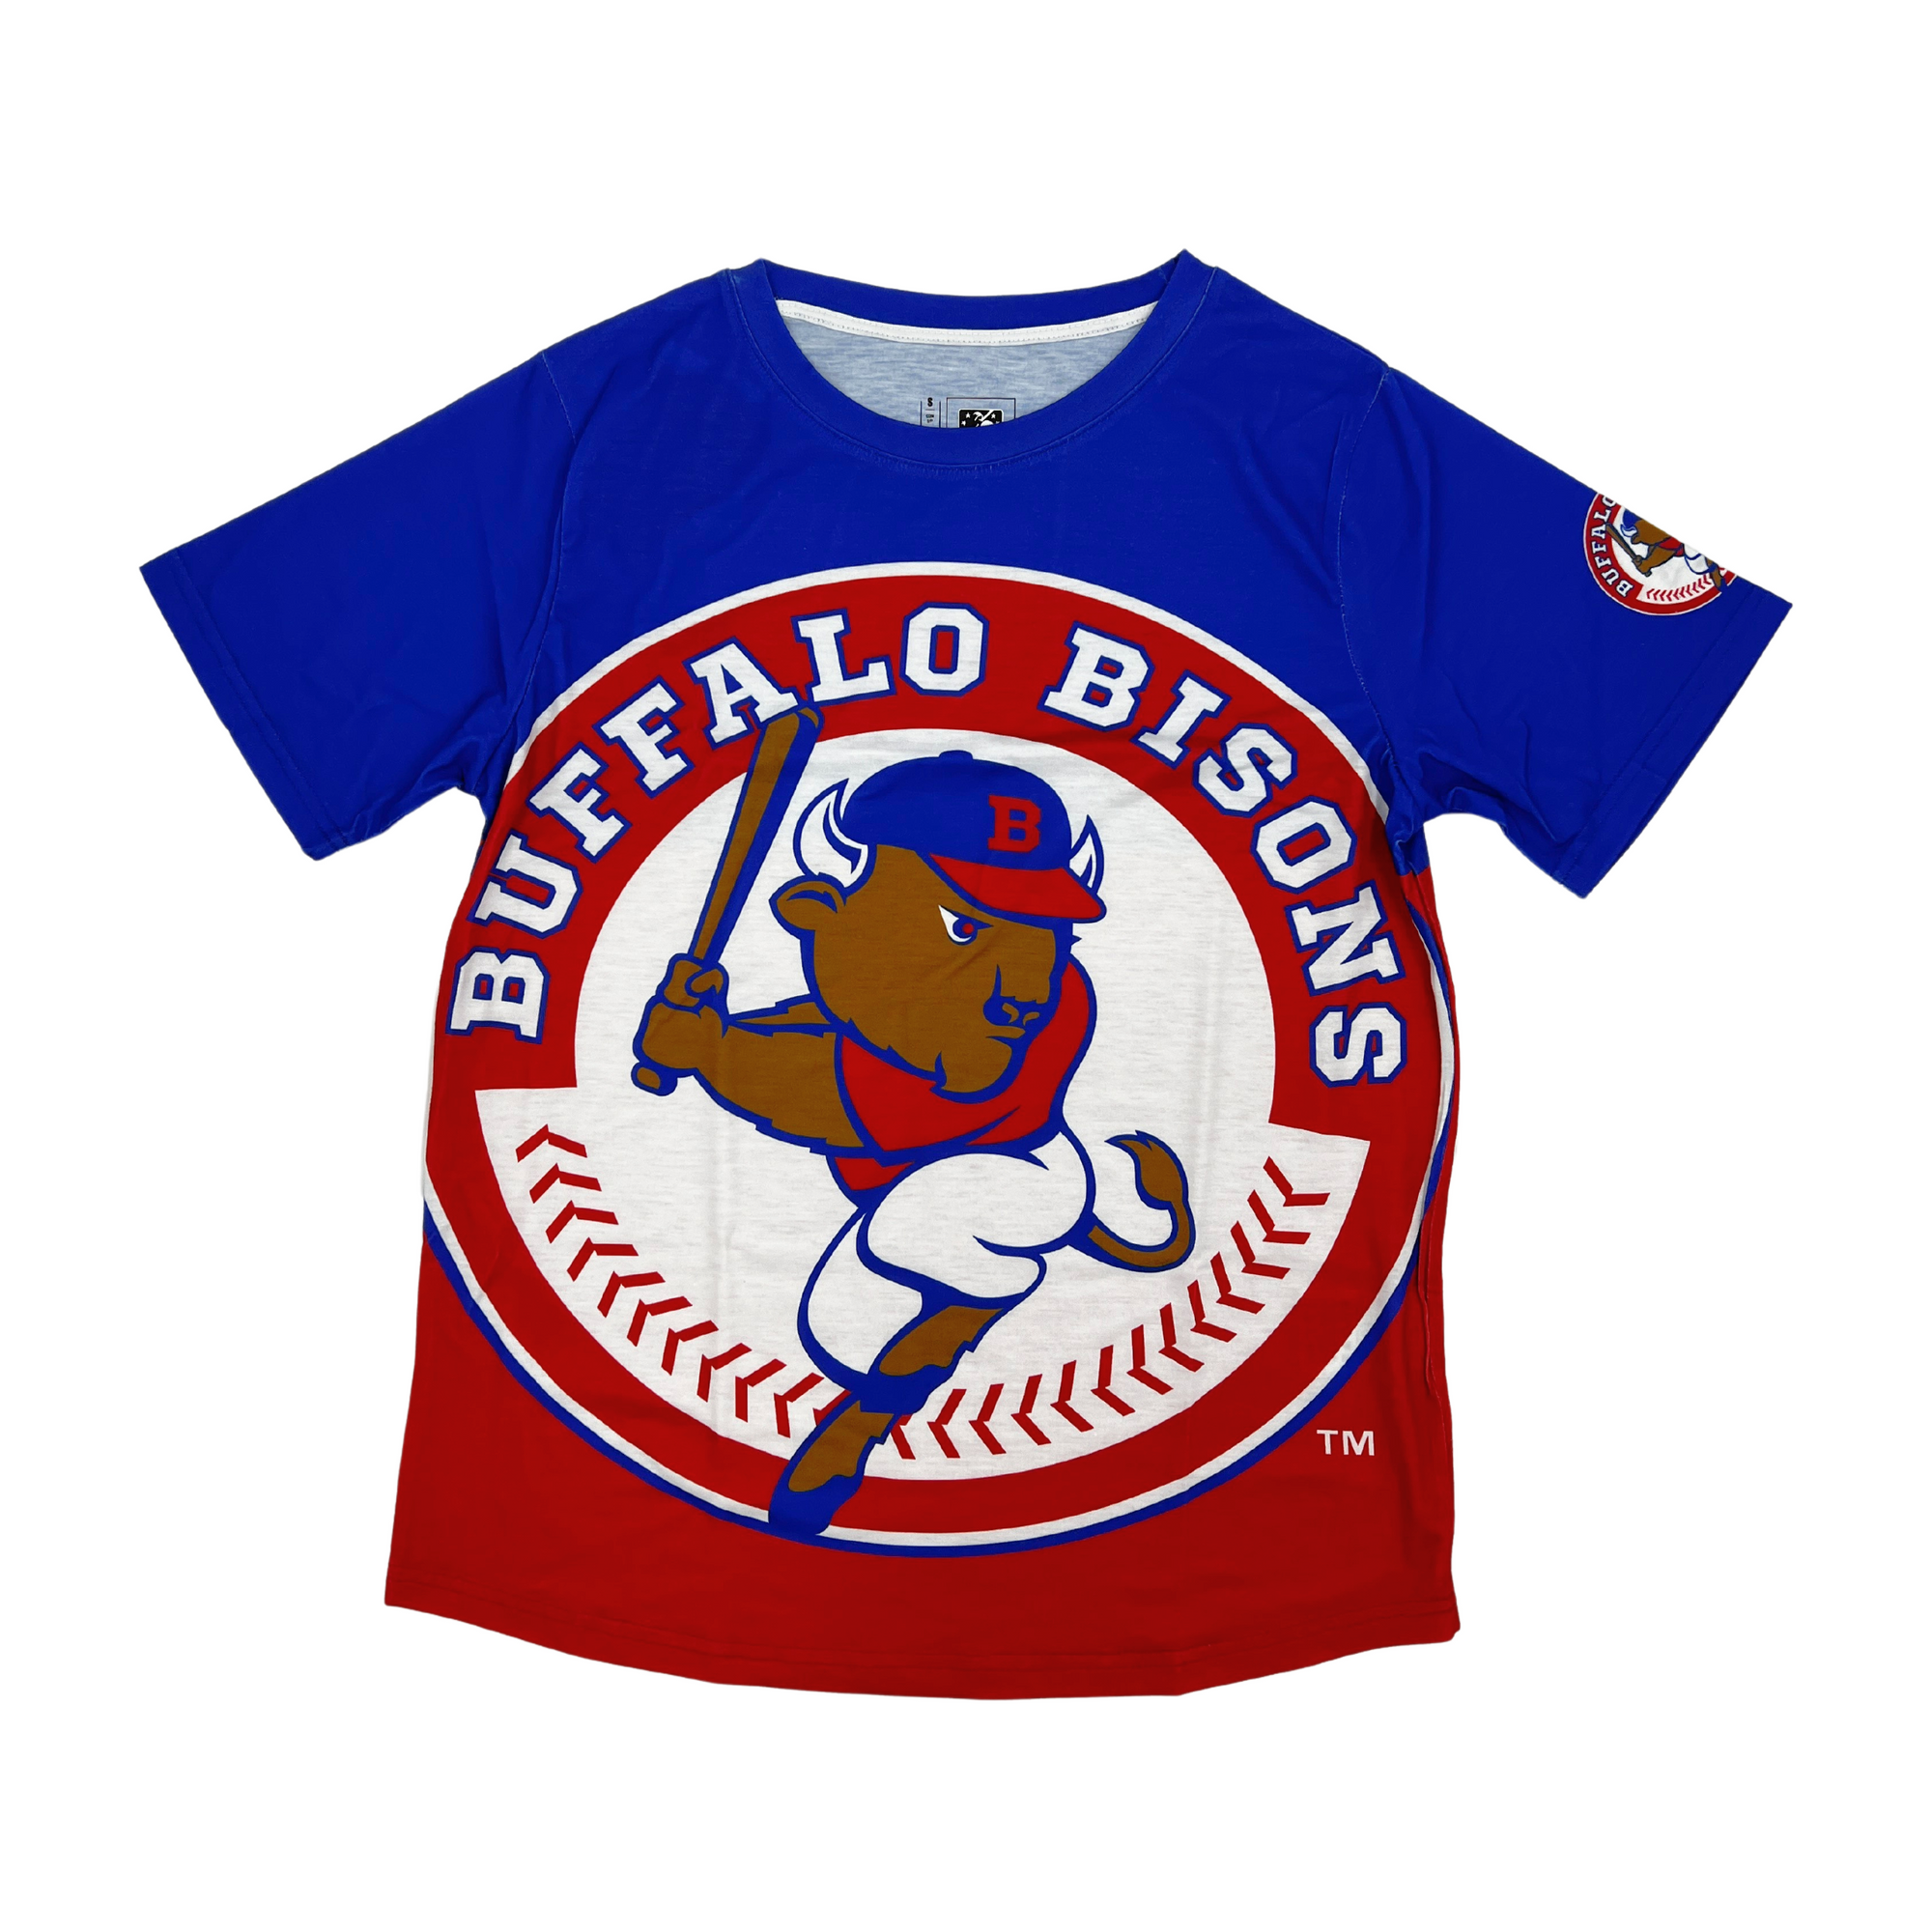 Buffalo Bisons Big Logo red and blue Colorblock Short Sleeve Shirt